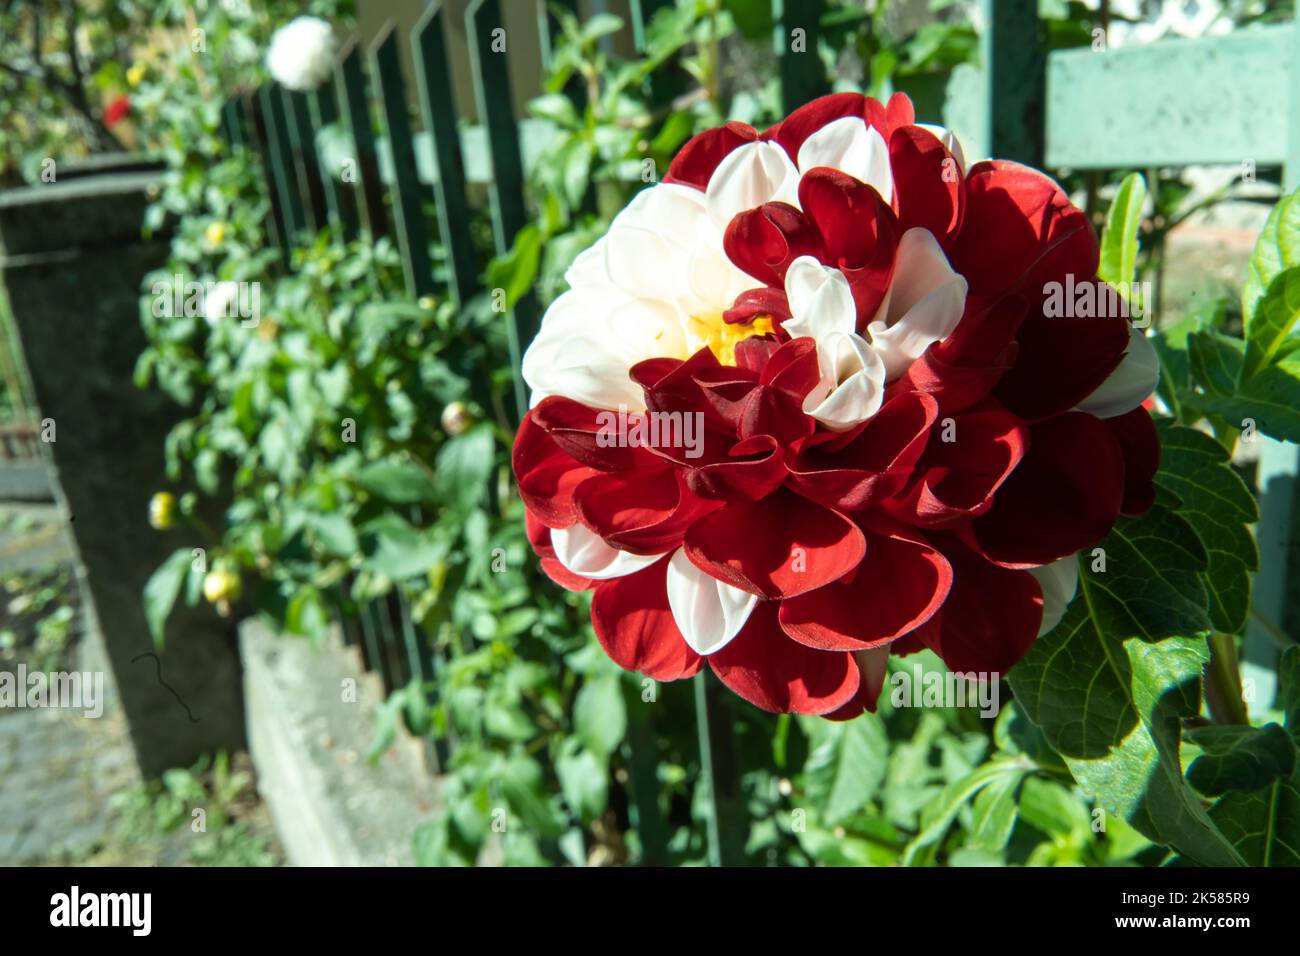 The Dahlia pinnata Cav. flower image of the red white color with the green leaves around. Stock Photo